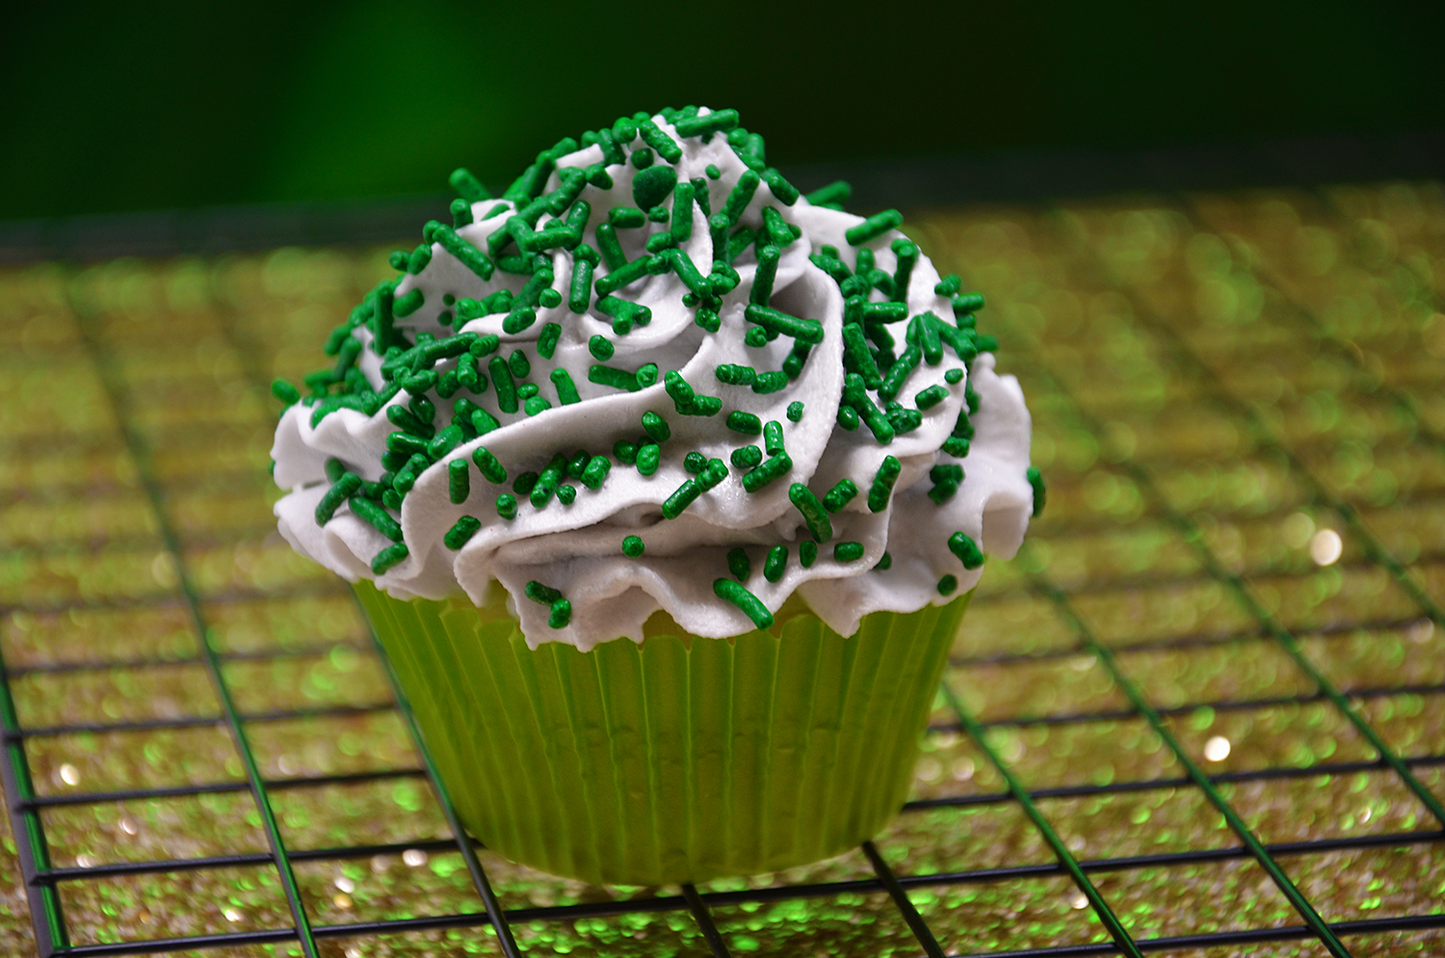 Load image into Gallery viewer, Gorgeous Green Jimmies Sprinkles 3oz Bottle
